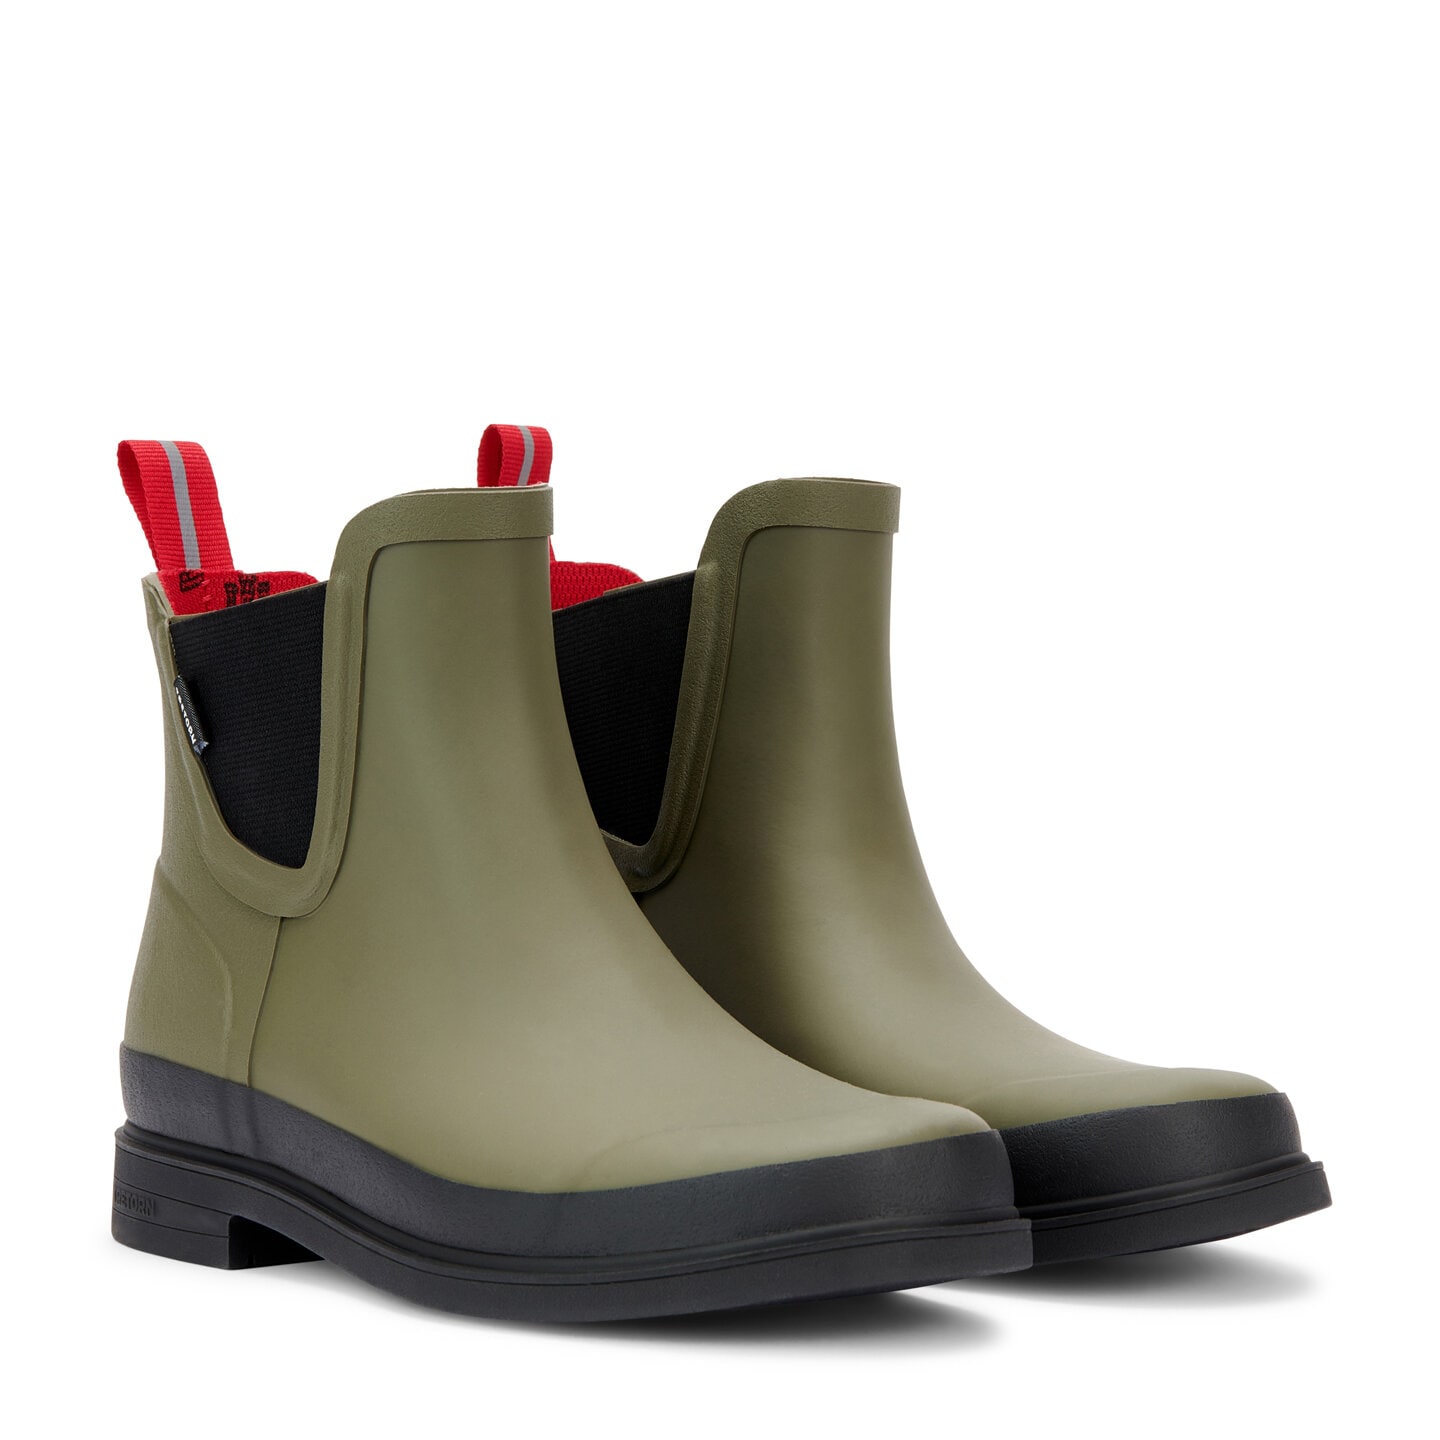 Eva Rubber boot by Tretorn for women in the colour green